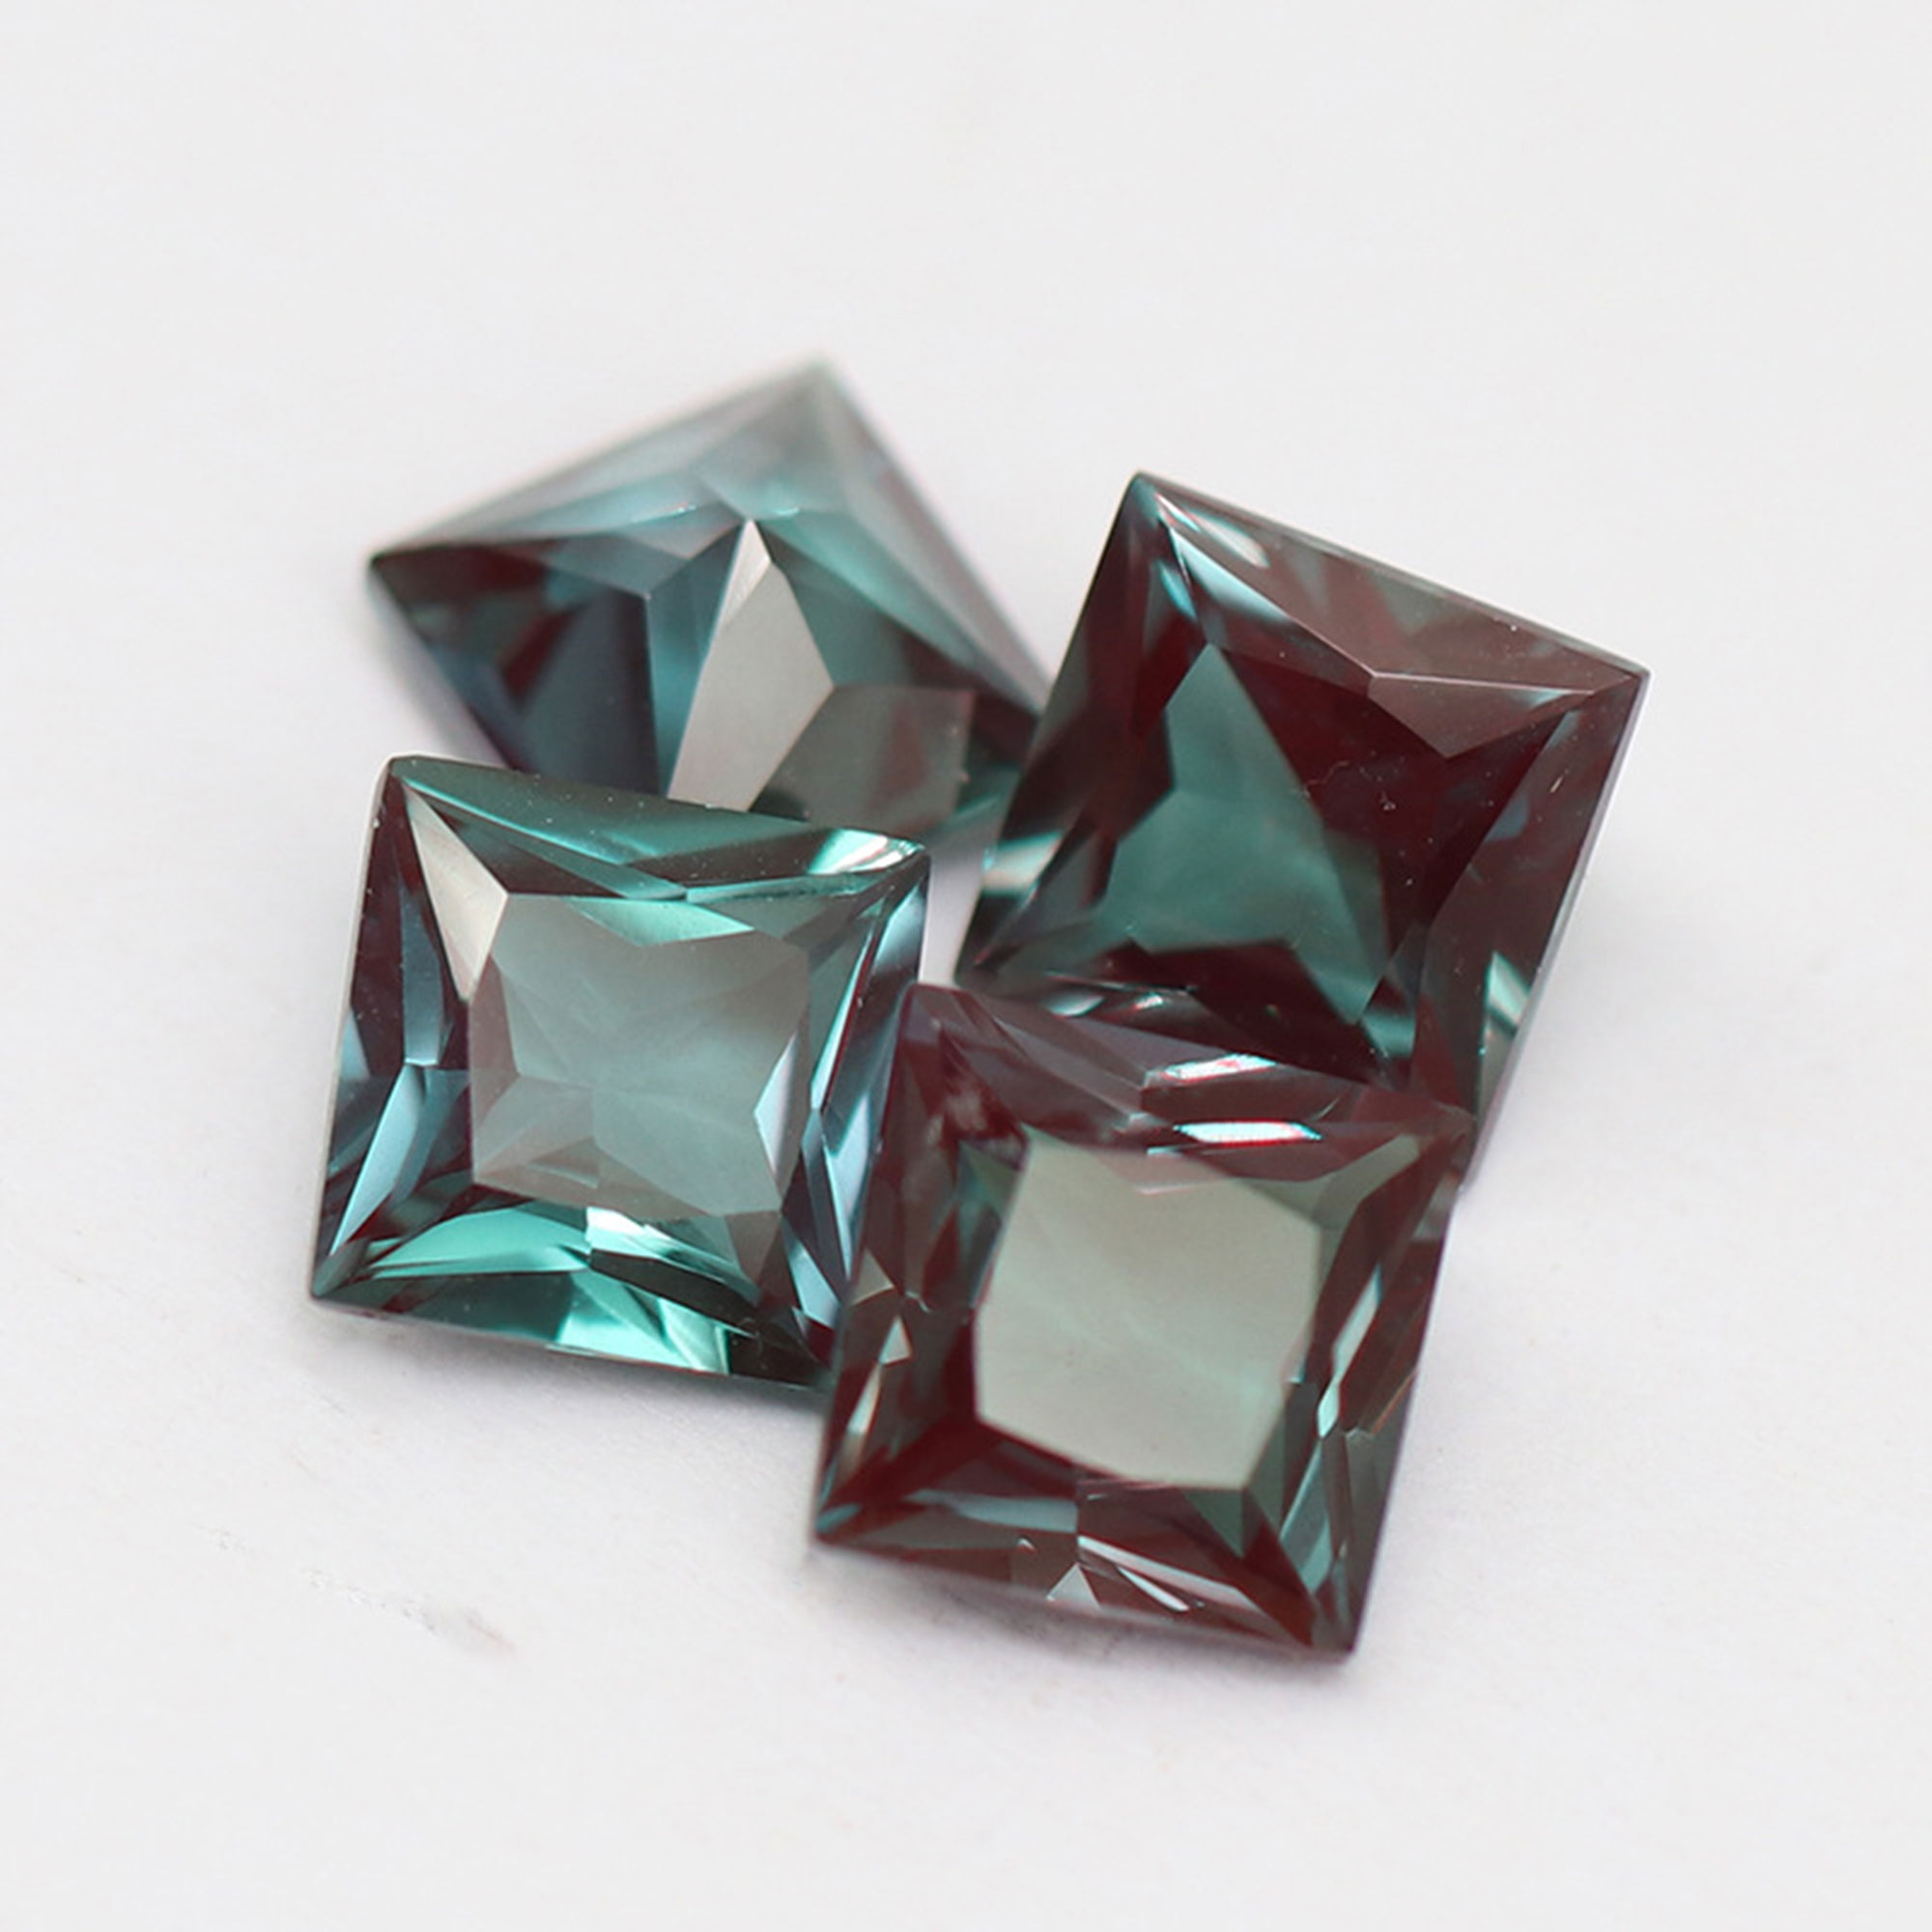 Lab Grown Alexandrite Faceted Gemstone,Princess Cut Square Color Change Stone,June Birthstone,DIY Loose Gemstone Supplies 4140029 - Click Image to Close